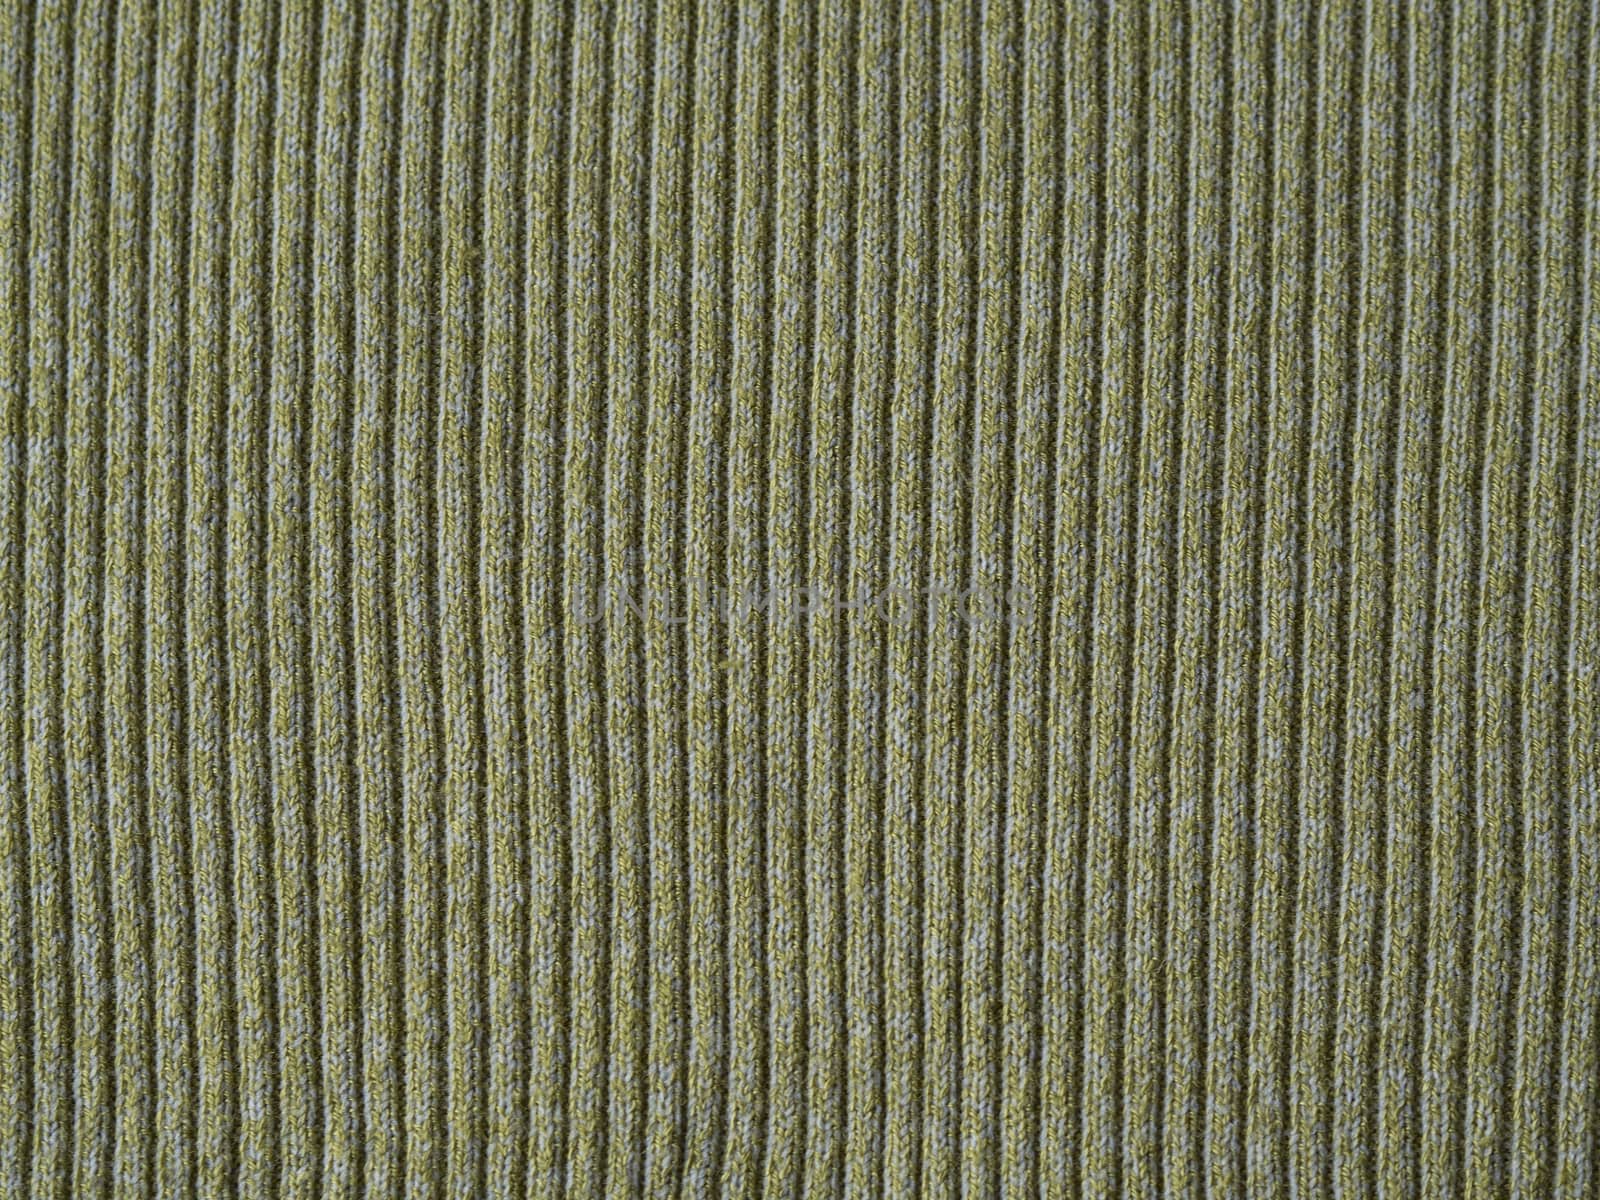 light green retro wool knitted fabric texture abstract background